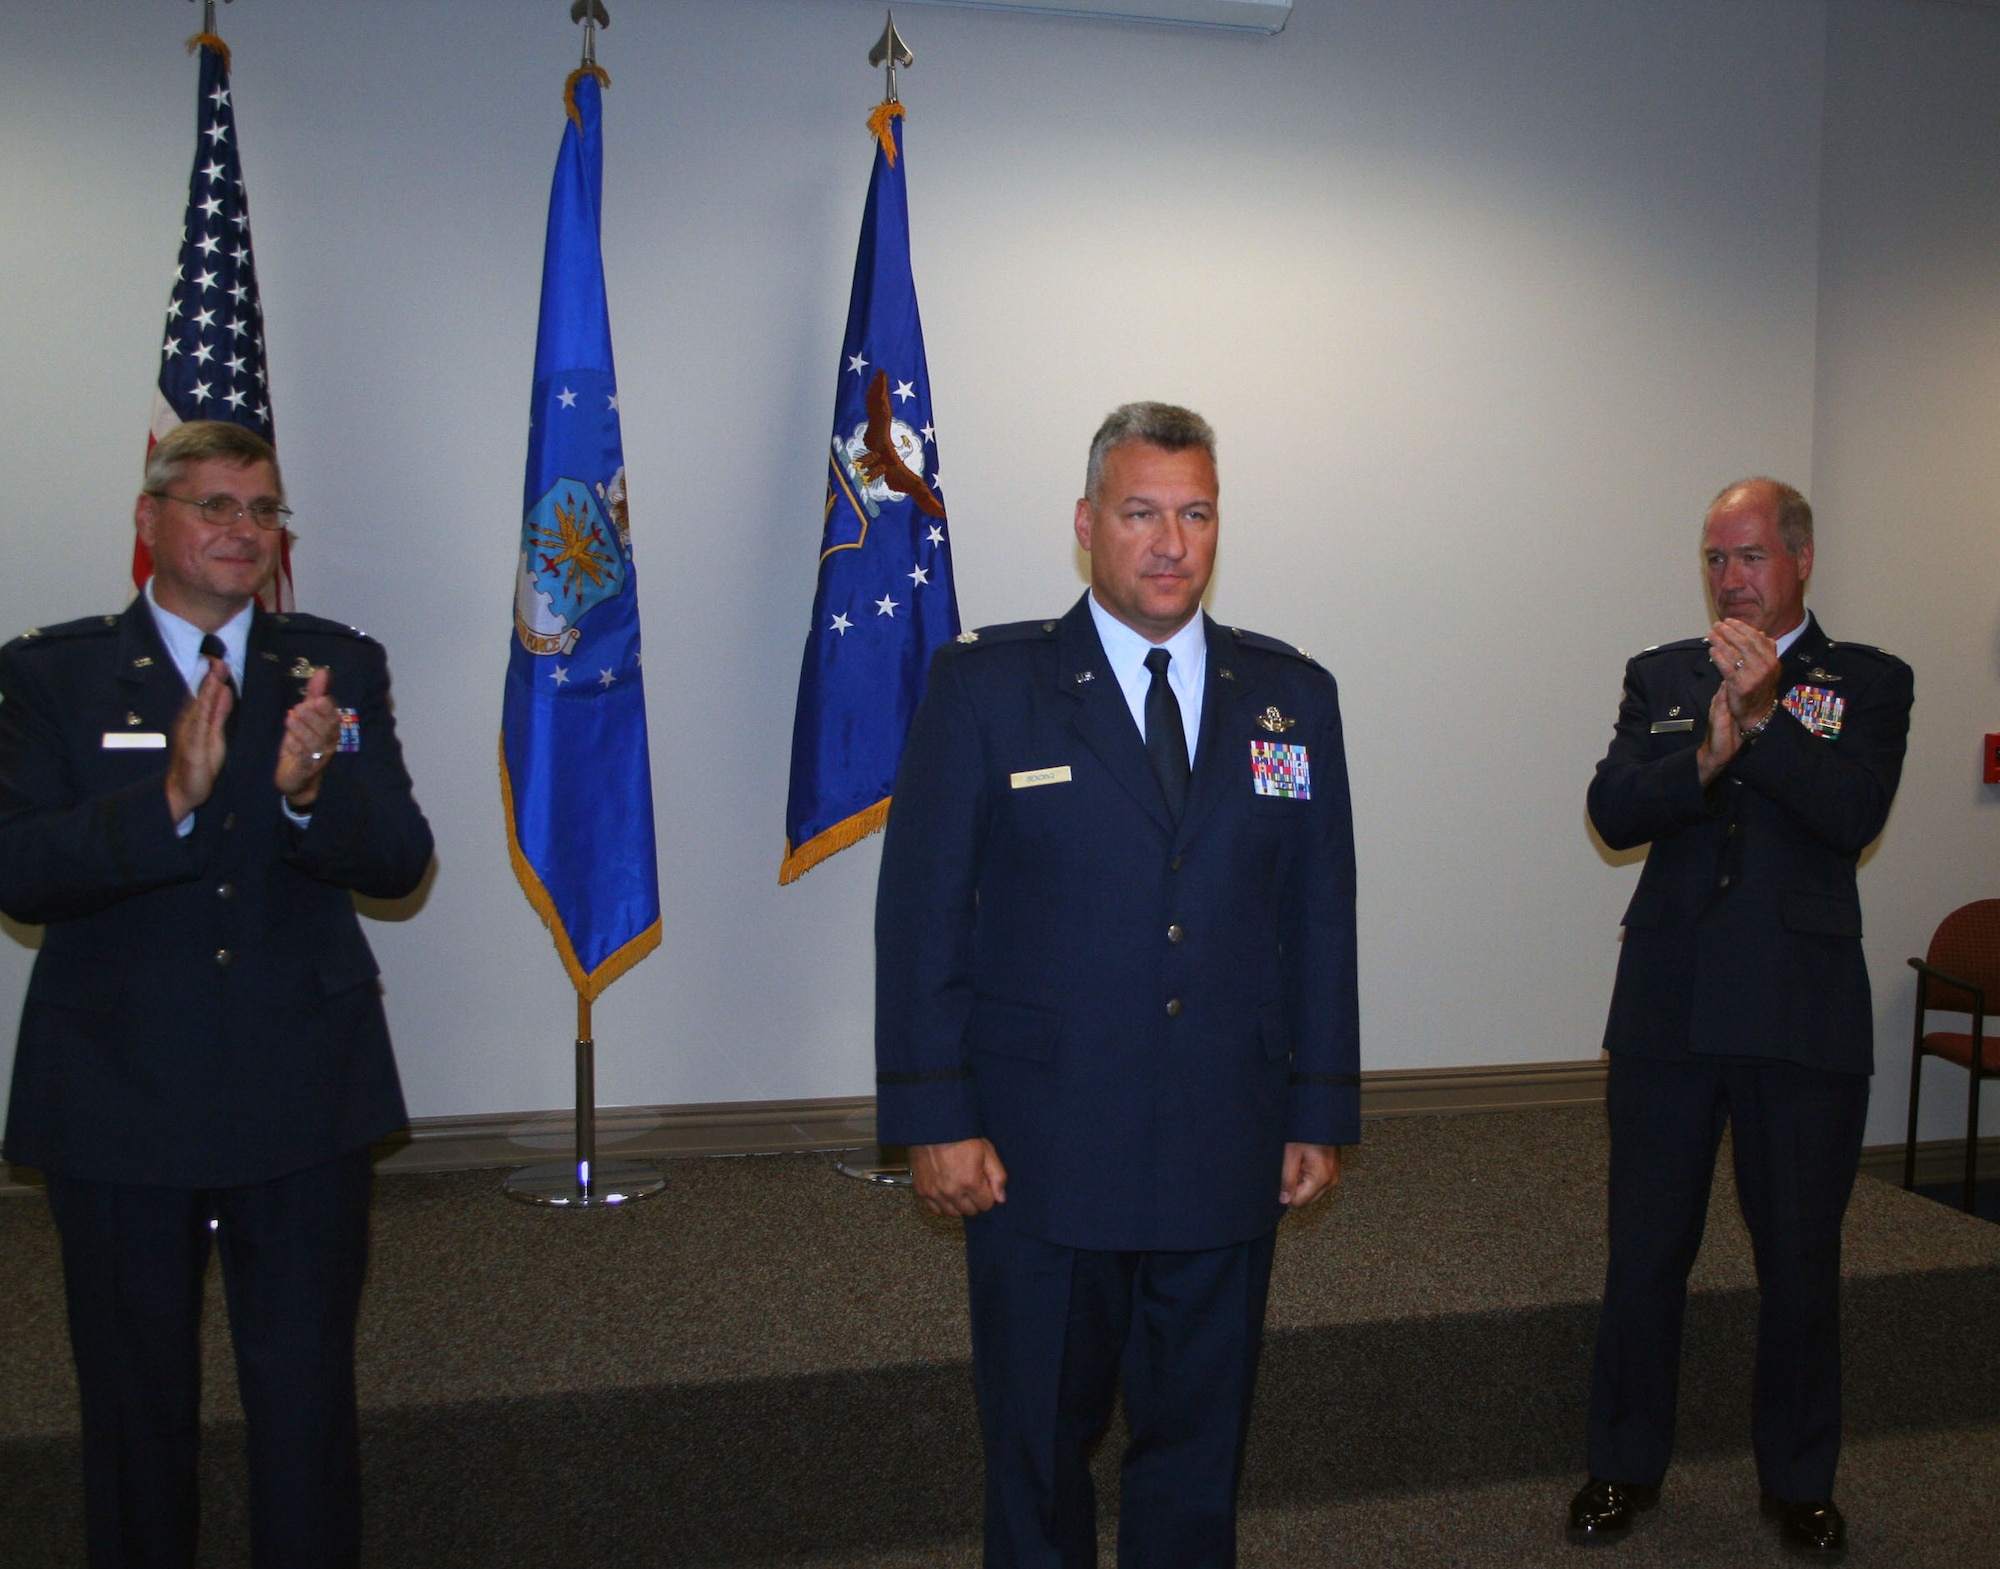 WRIGHT-PATTERSON AFB, Ohio - Lt. Col. Mike Bending addresses the audience after he assumes command of the 89th Airlift Squadron, a squadron within the 445th Airlift Wing.  Col. Roger Gallet (left), 445th Operations Group commander, and Lt. Col. Timothy Baldwin (right), outgoing 89th Airlift Squadron commander, clap as Col. Bending makes his first speech as commander. (U.S. Air Force photo/Staff Sgt. Martin Moleski)